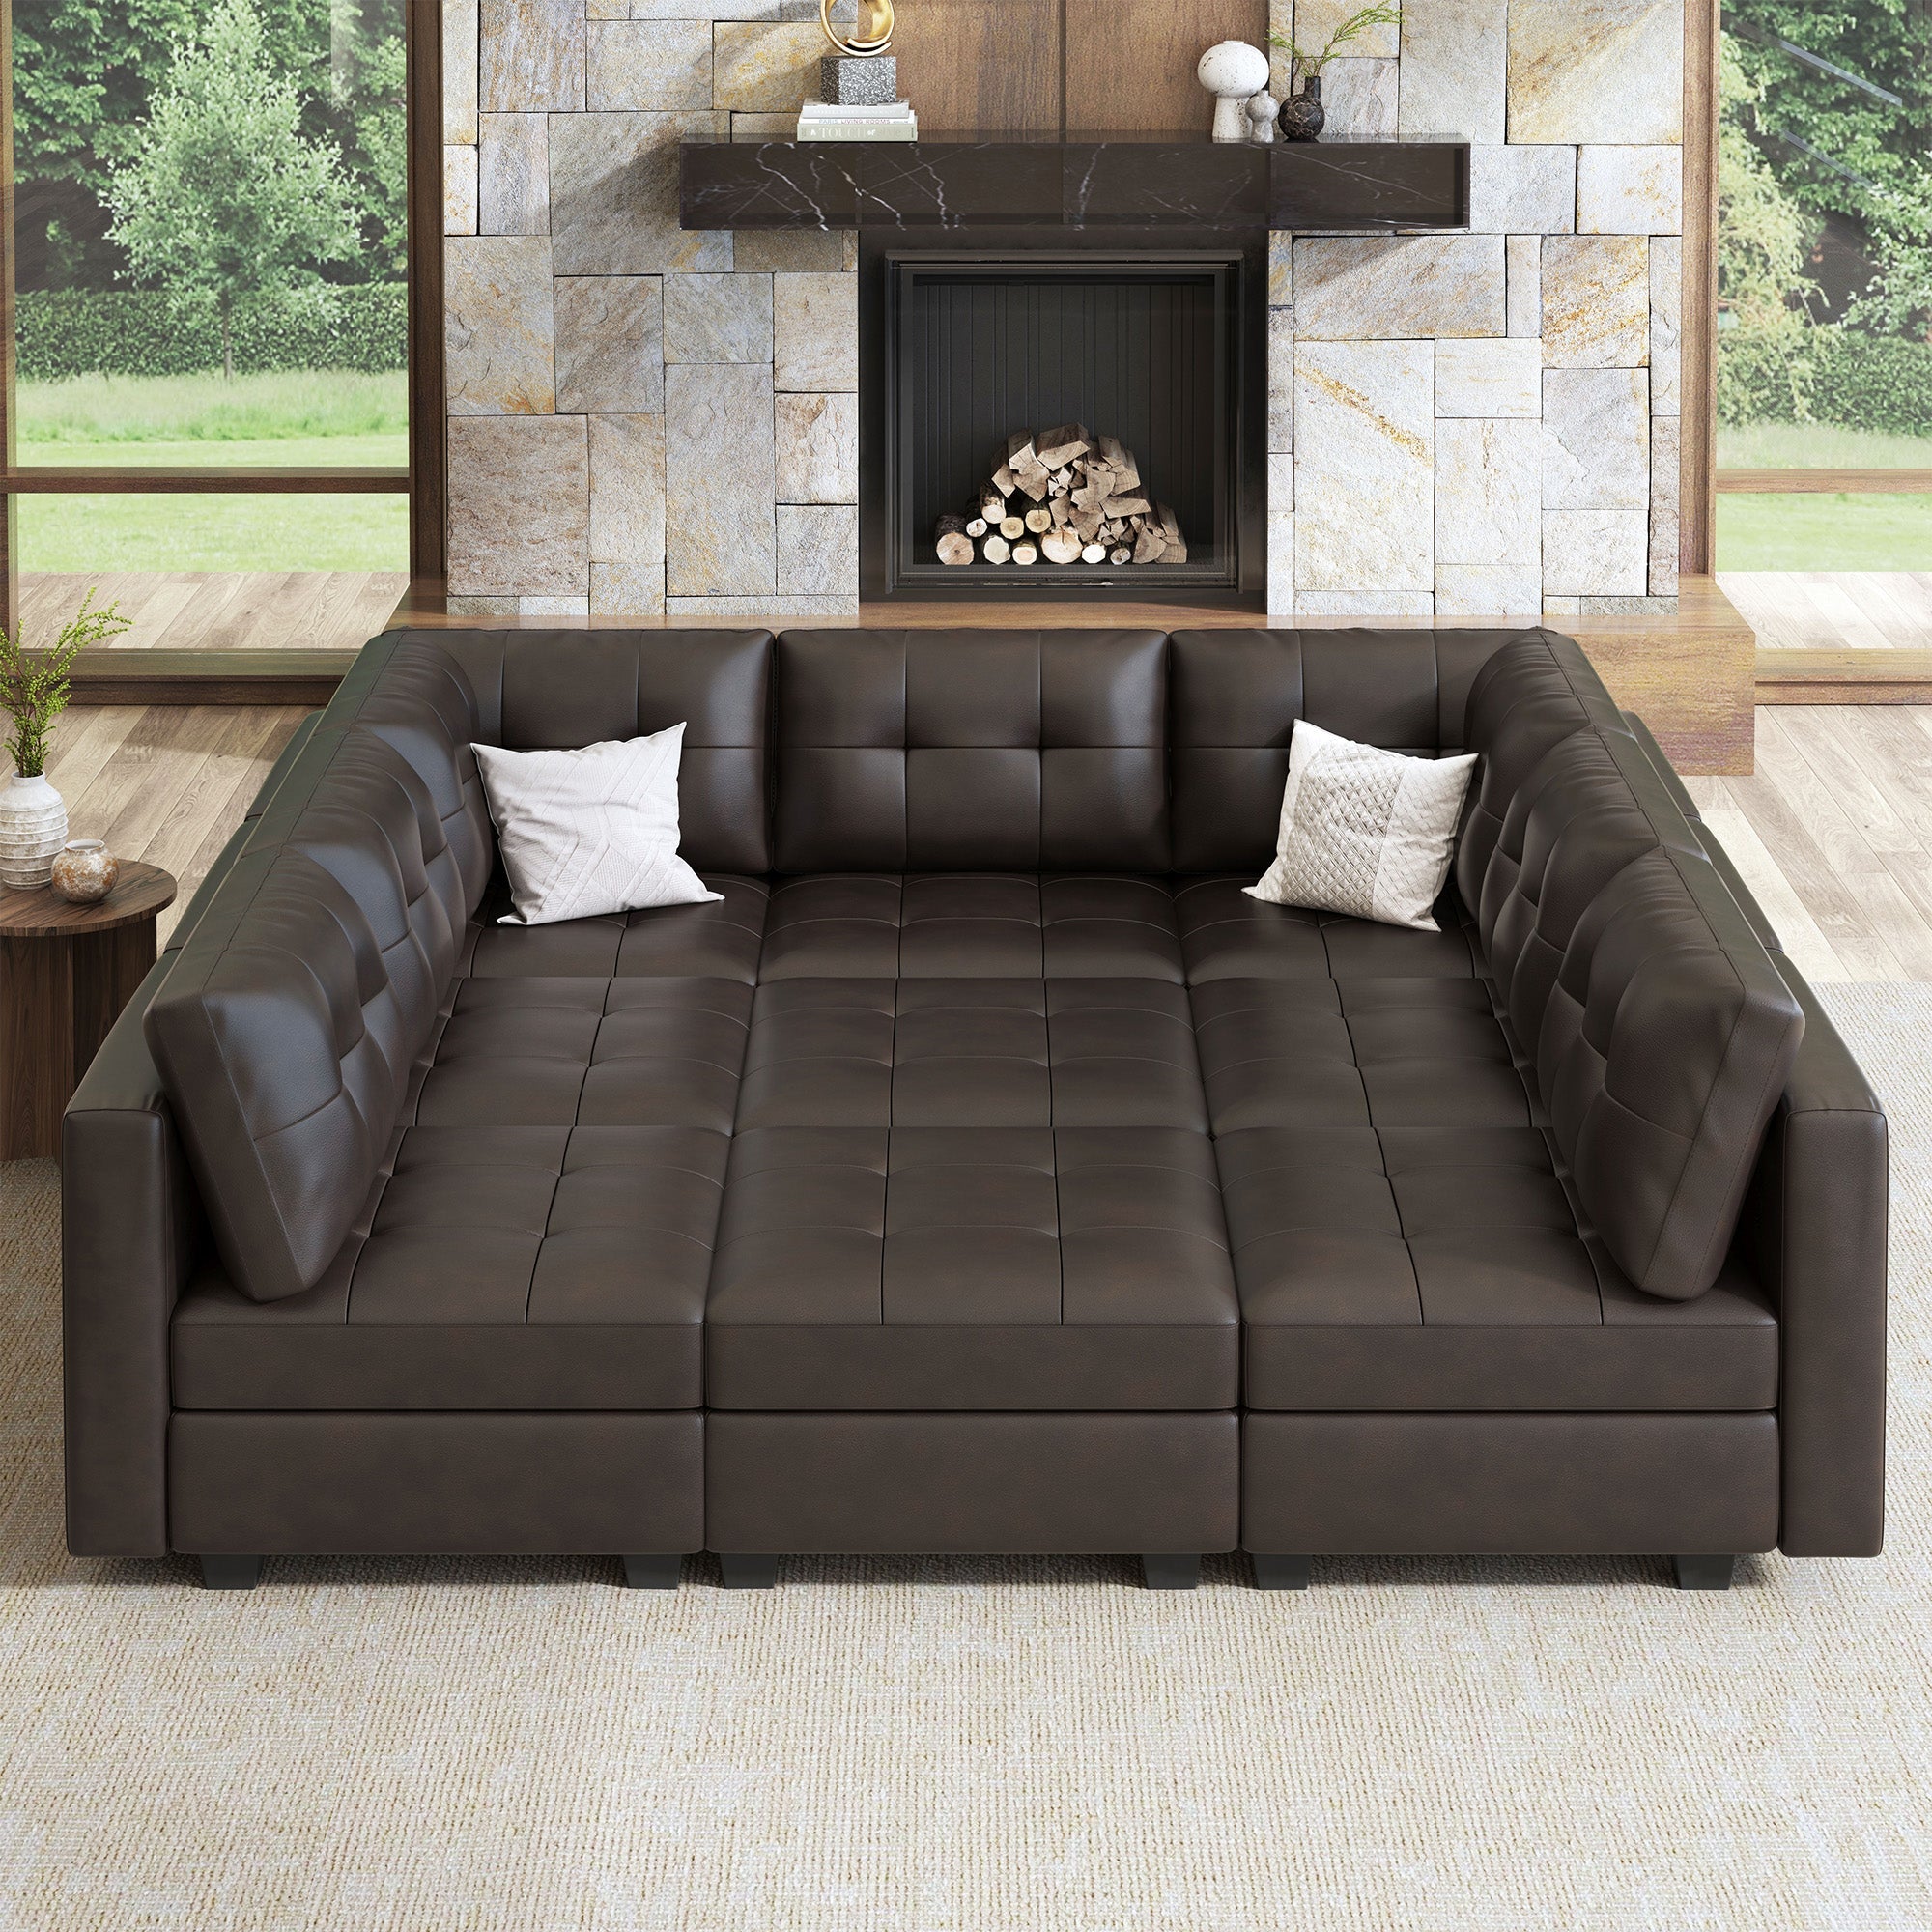 HONBAY 9-Piece Faux Leather Modular Sleeper Sectional With Storage Seat